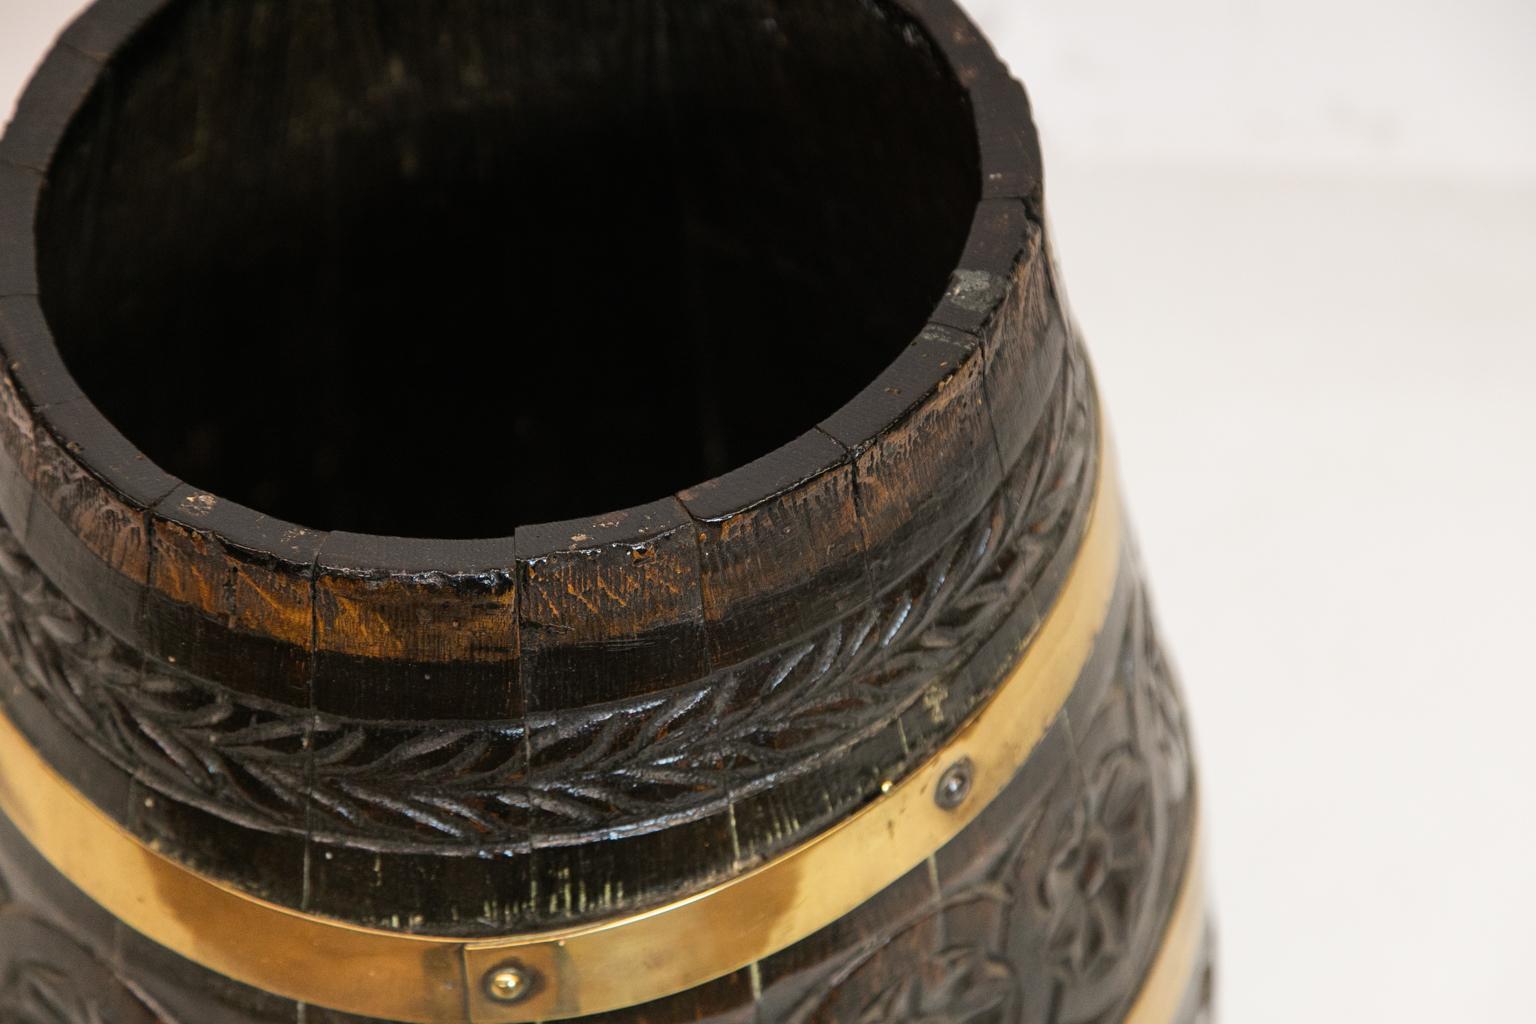 Carved brass bound barrel, with leaves and rosettes carved in high relief. It likely originally had a lid.